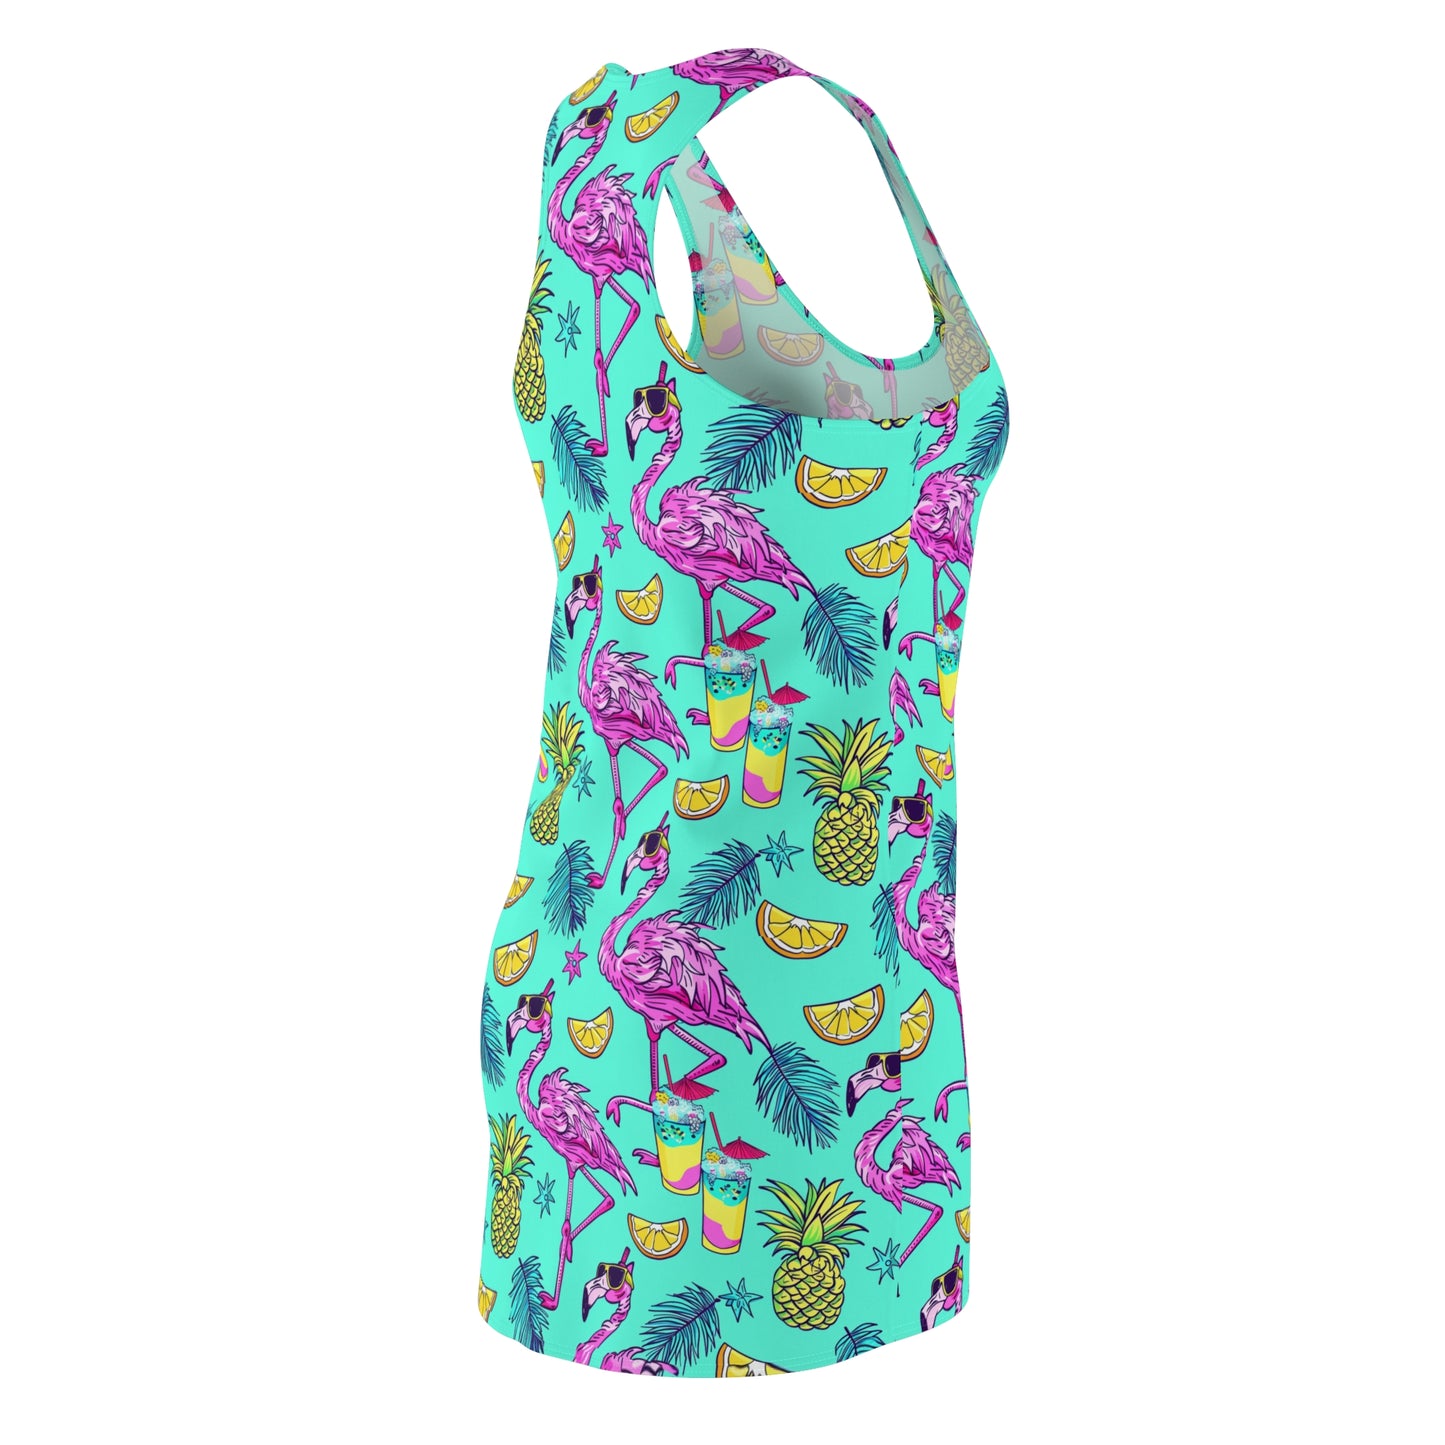 Flamingo Party Surface Beach Volleyball Club Cover Up Racerback Dress